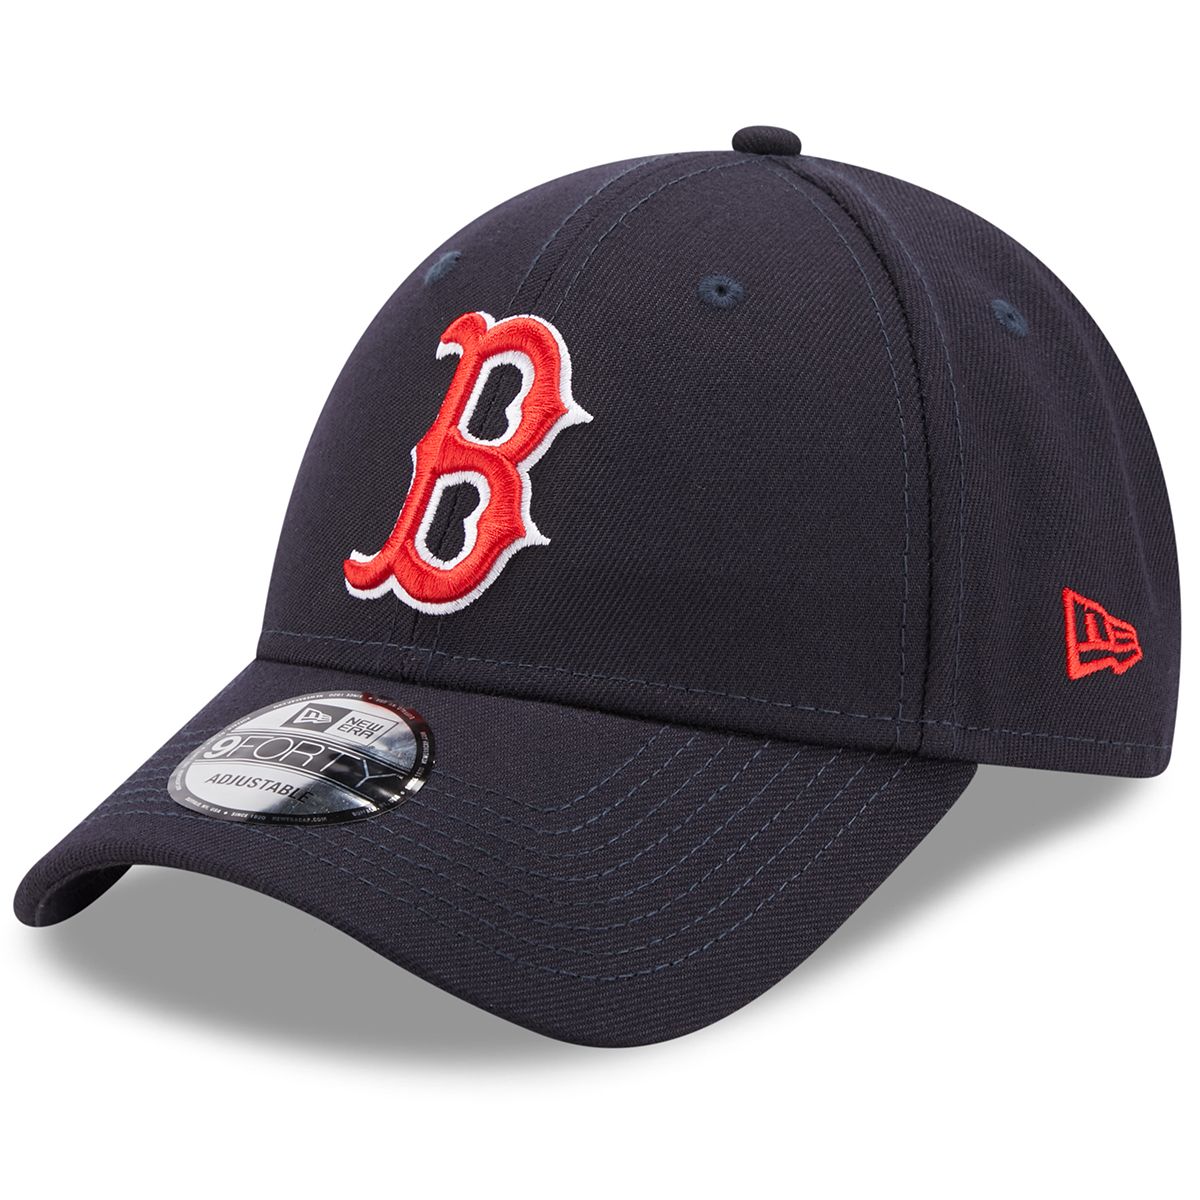 Boston Red Sox Jerseys in Boston Red Sox Team Shop 